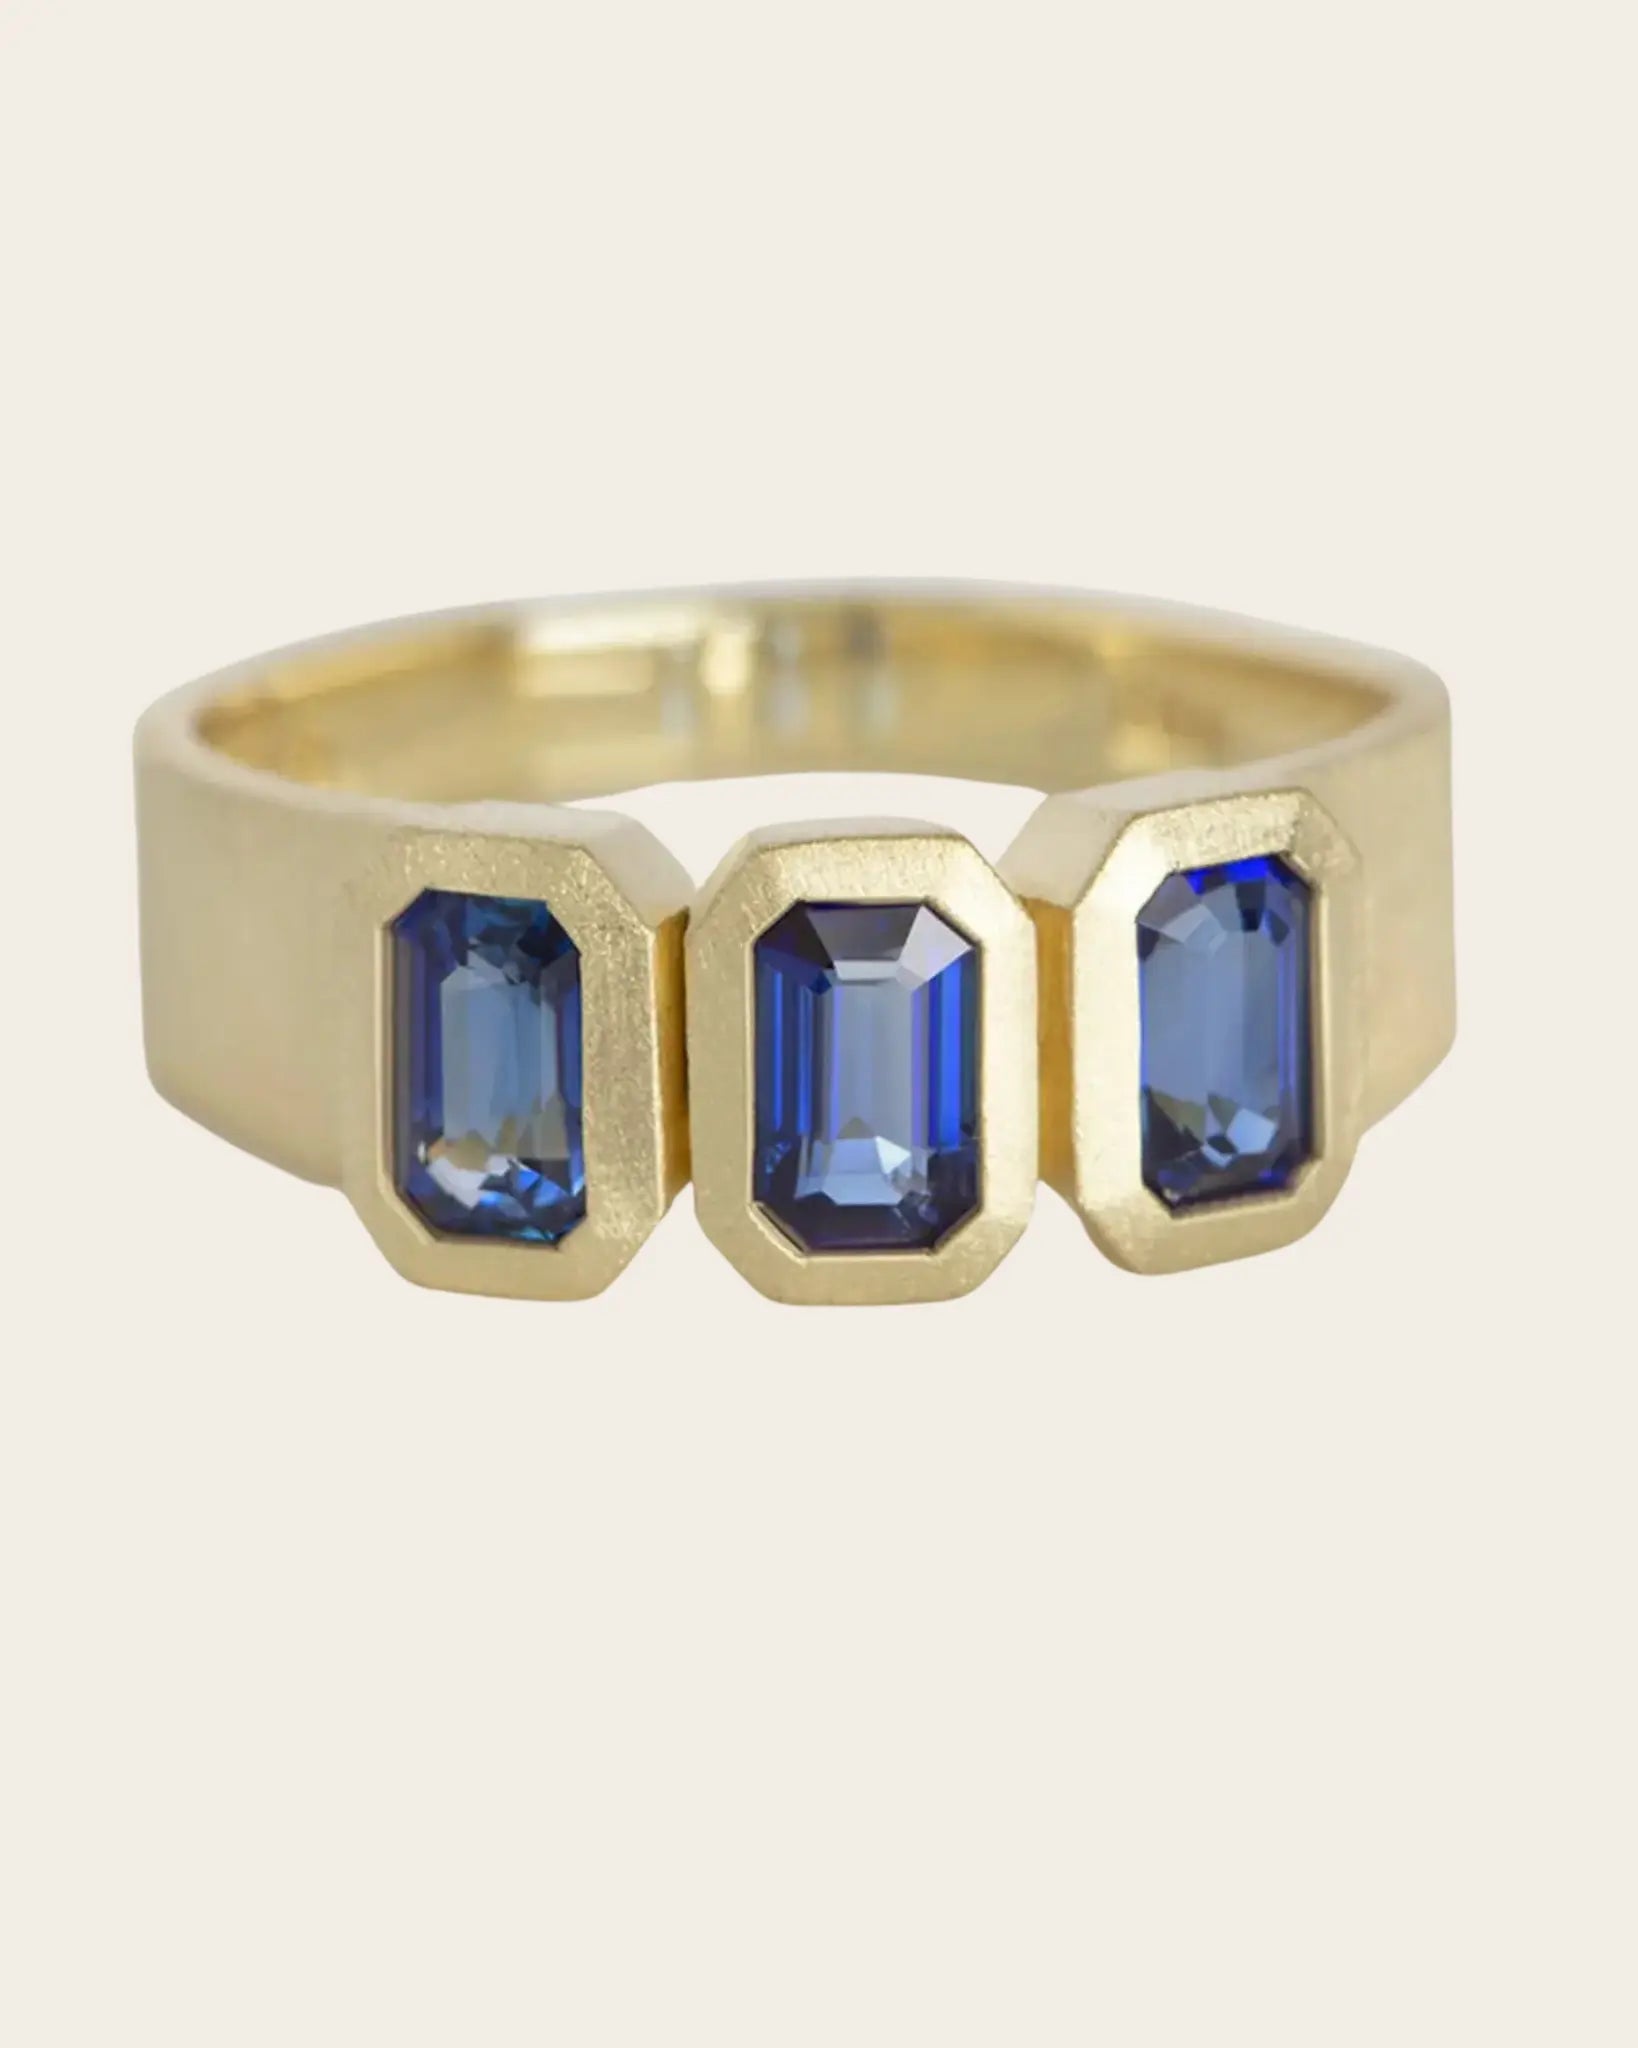 One-of-a-kind blue sapphire ring One-of-a-kind blue sapphire ring Elizabeth Street Elizabeth Street  Squash Blossom Vail